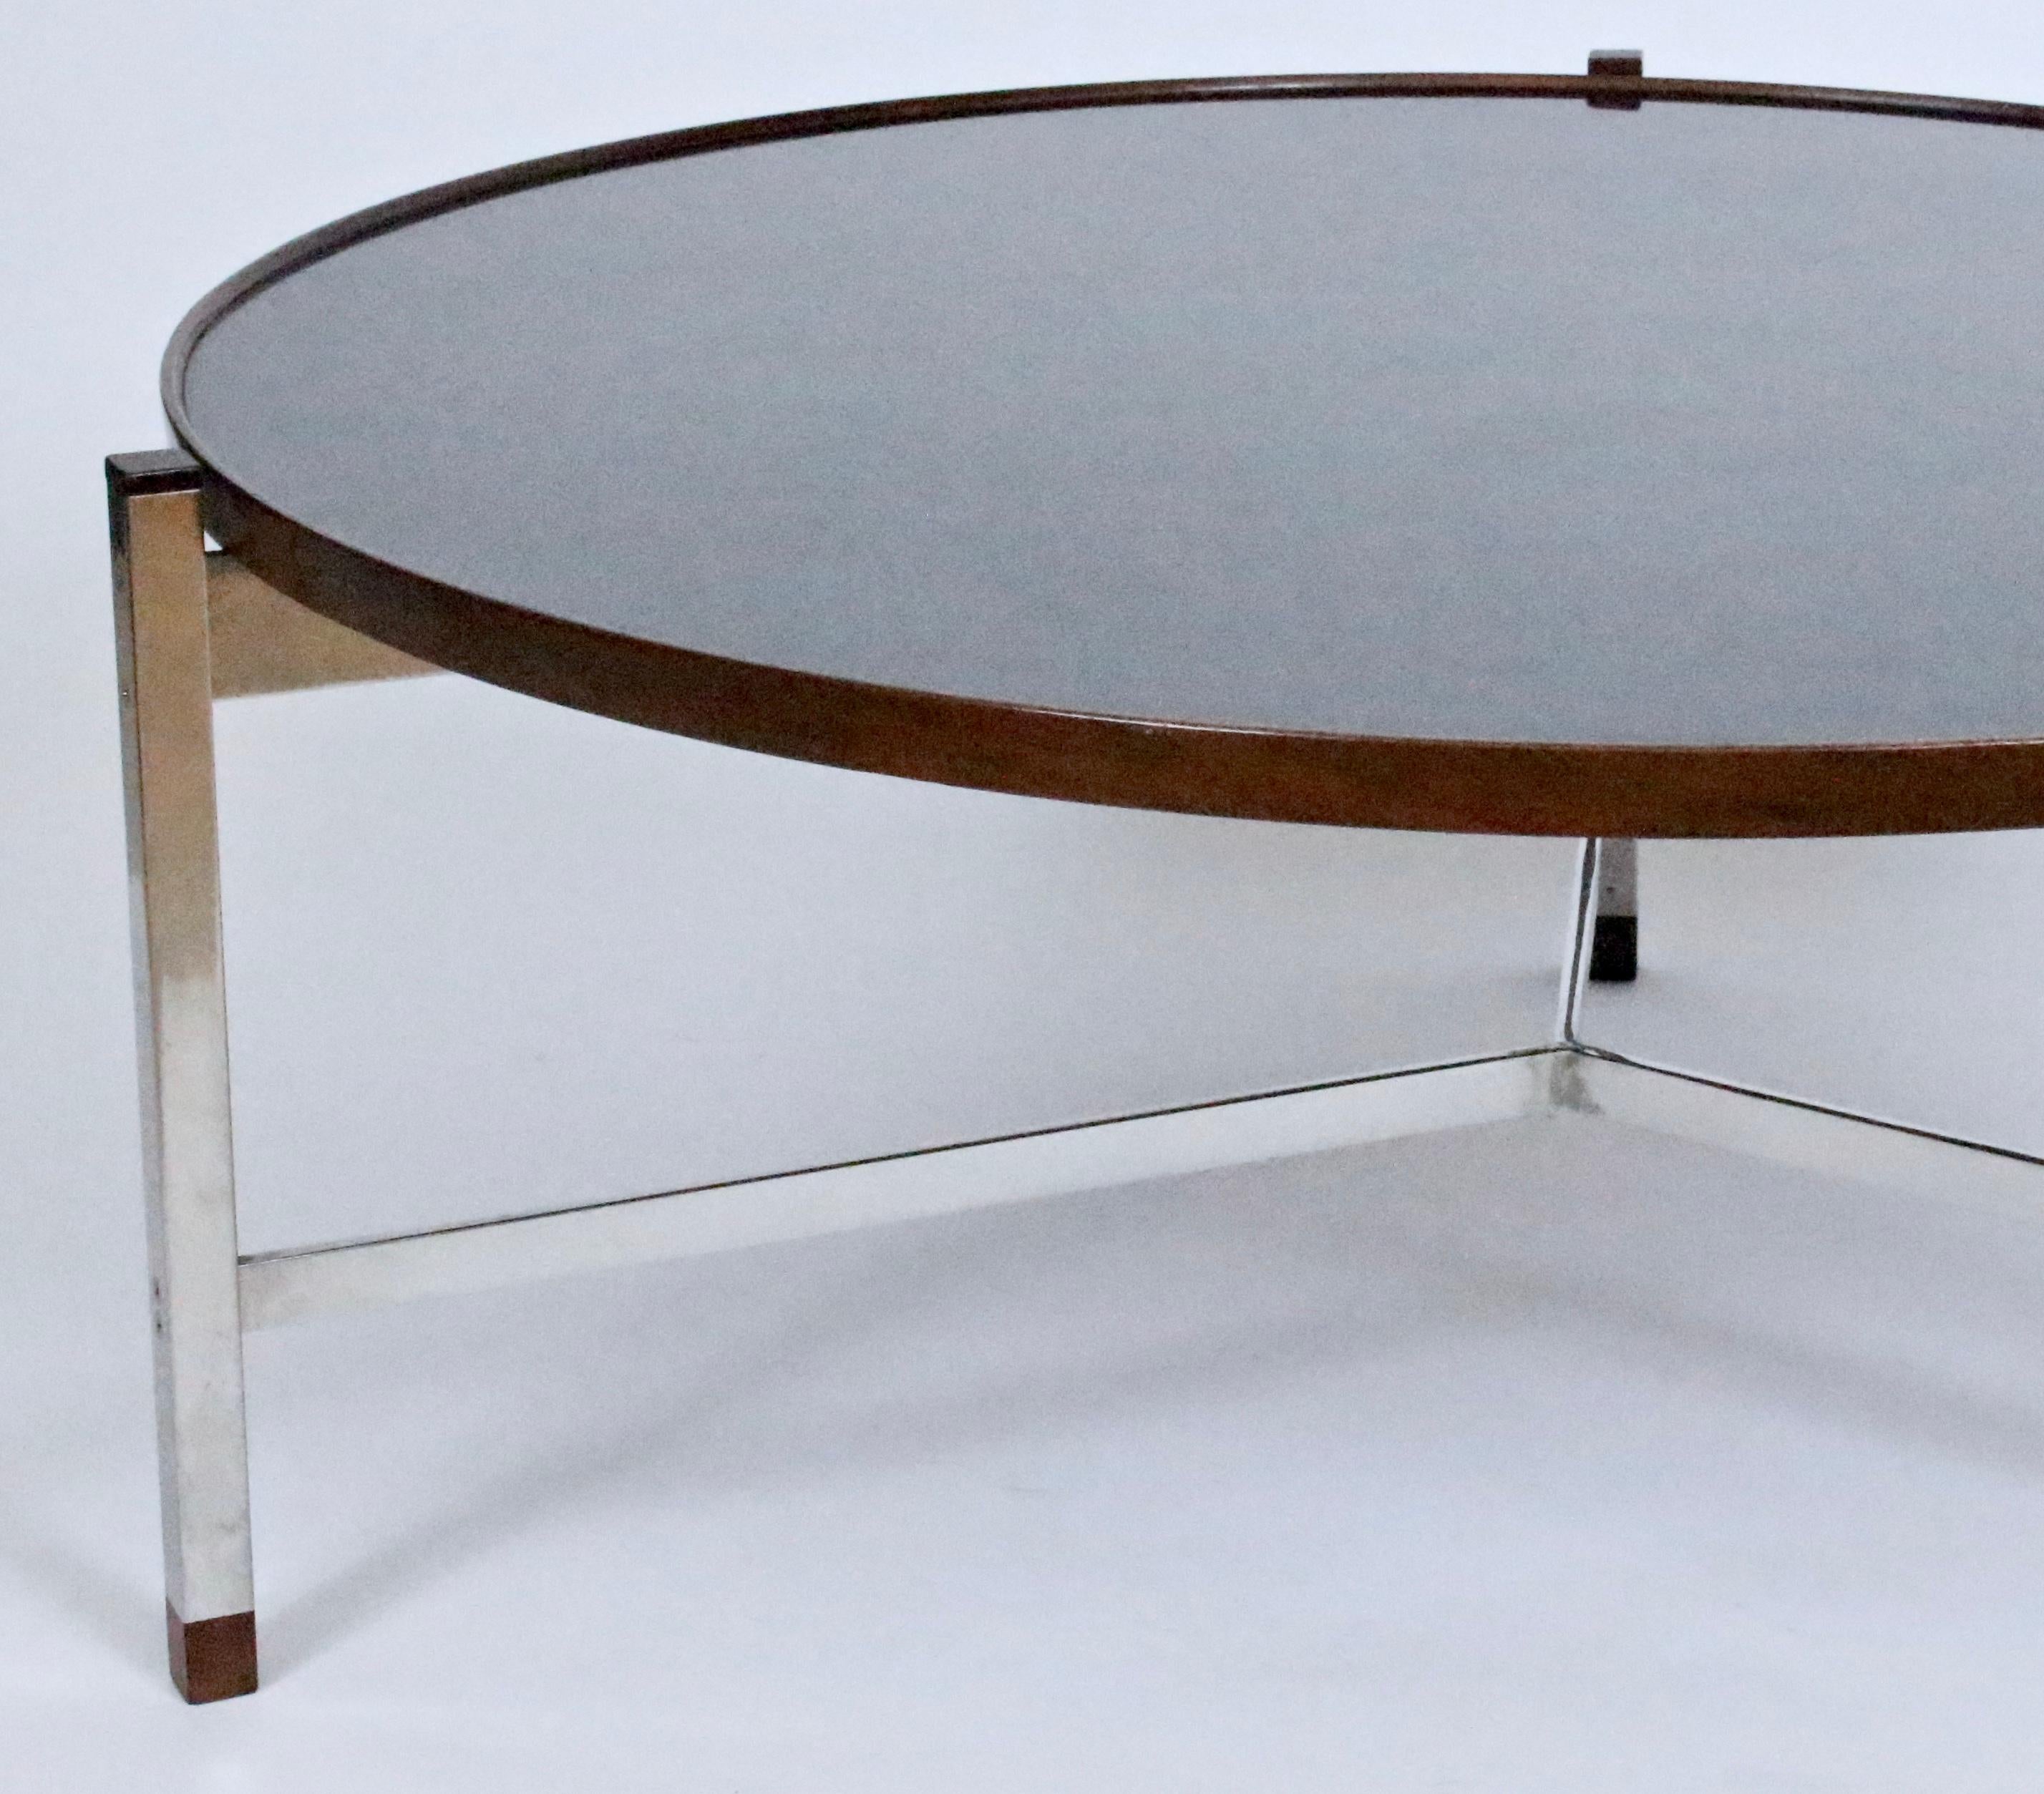 American Edward Wormley for Dunbar Rosewood, Chrome and Black Micarta Coffee Table, 1950s